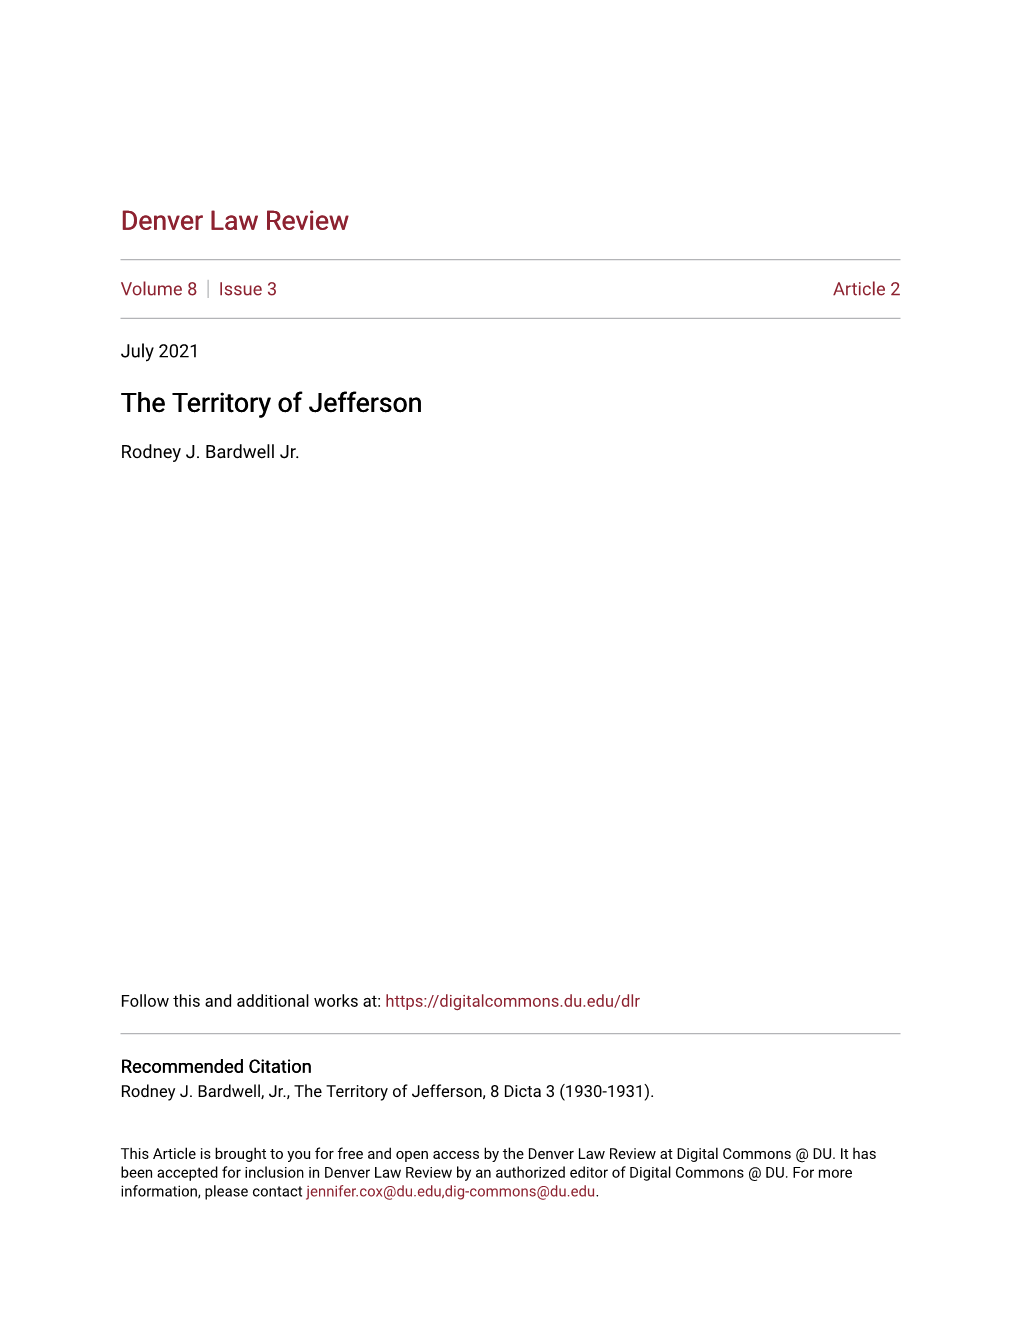 The Territory of Jefferson